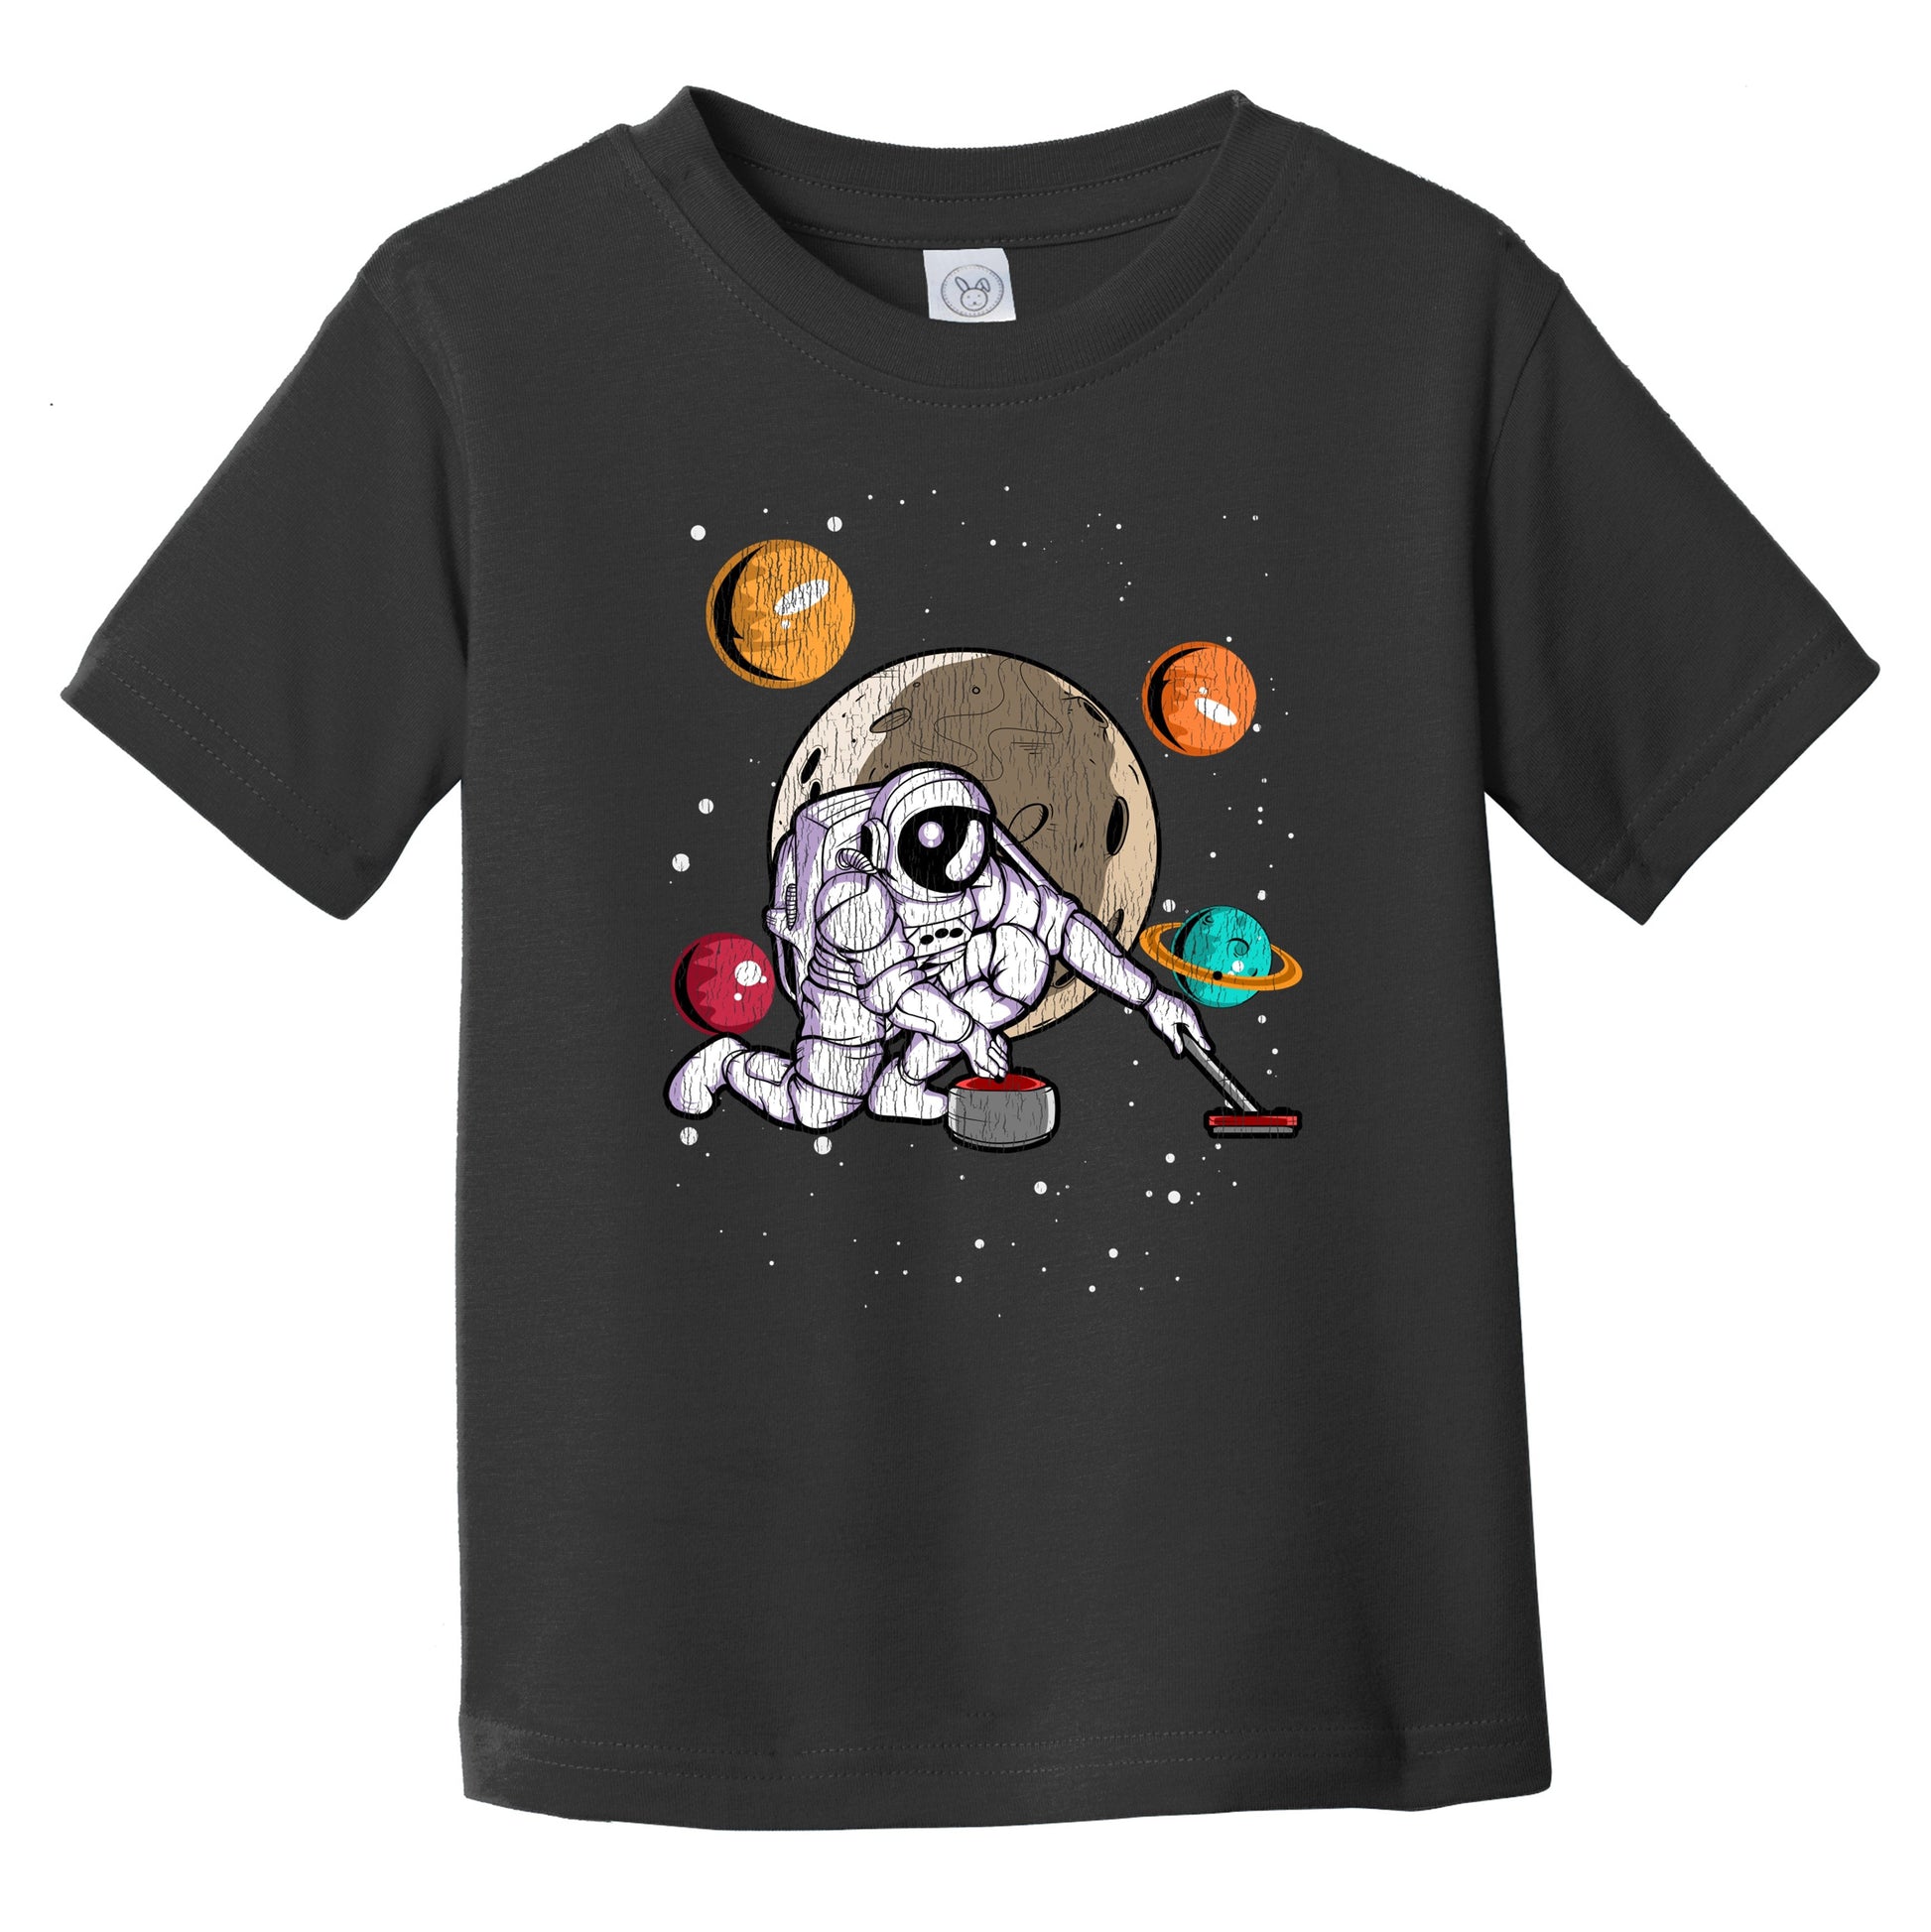 Curling Astronaut Outer Space Spaceman Distressed Infant Toddler T-Shirt